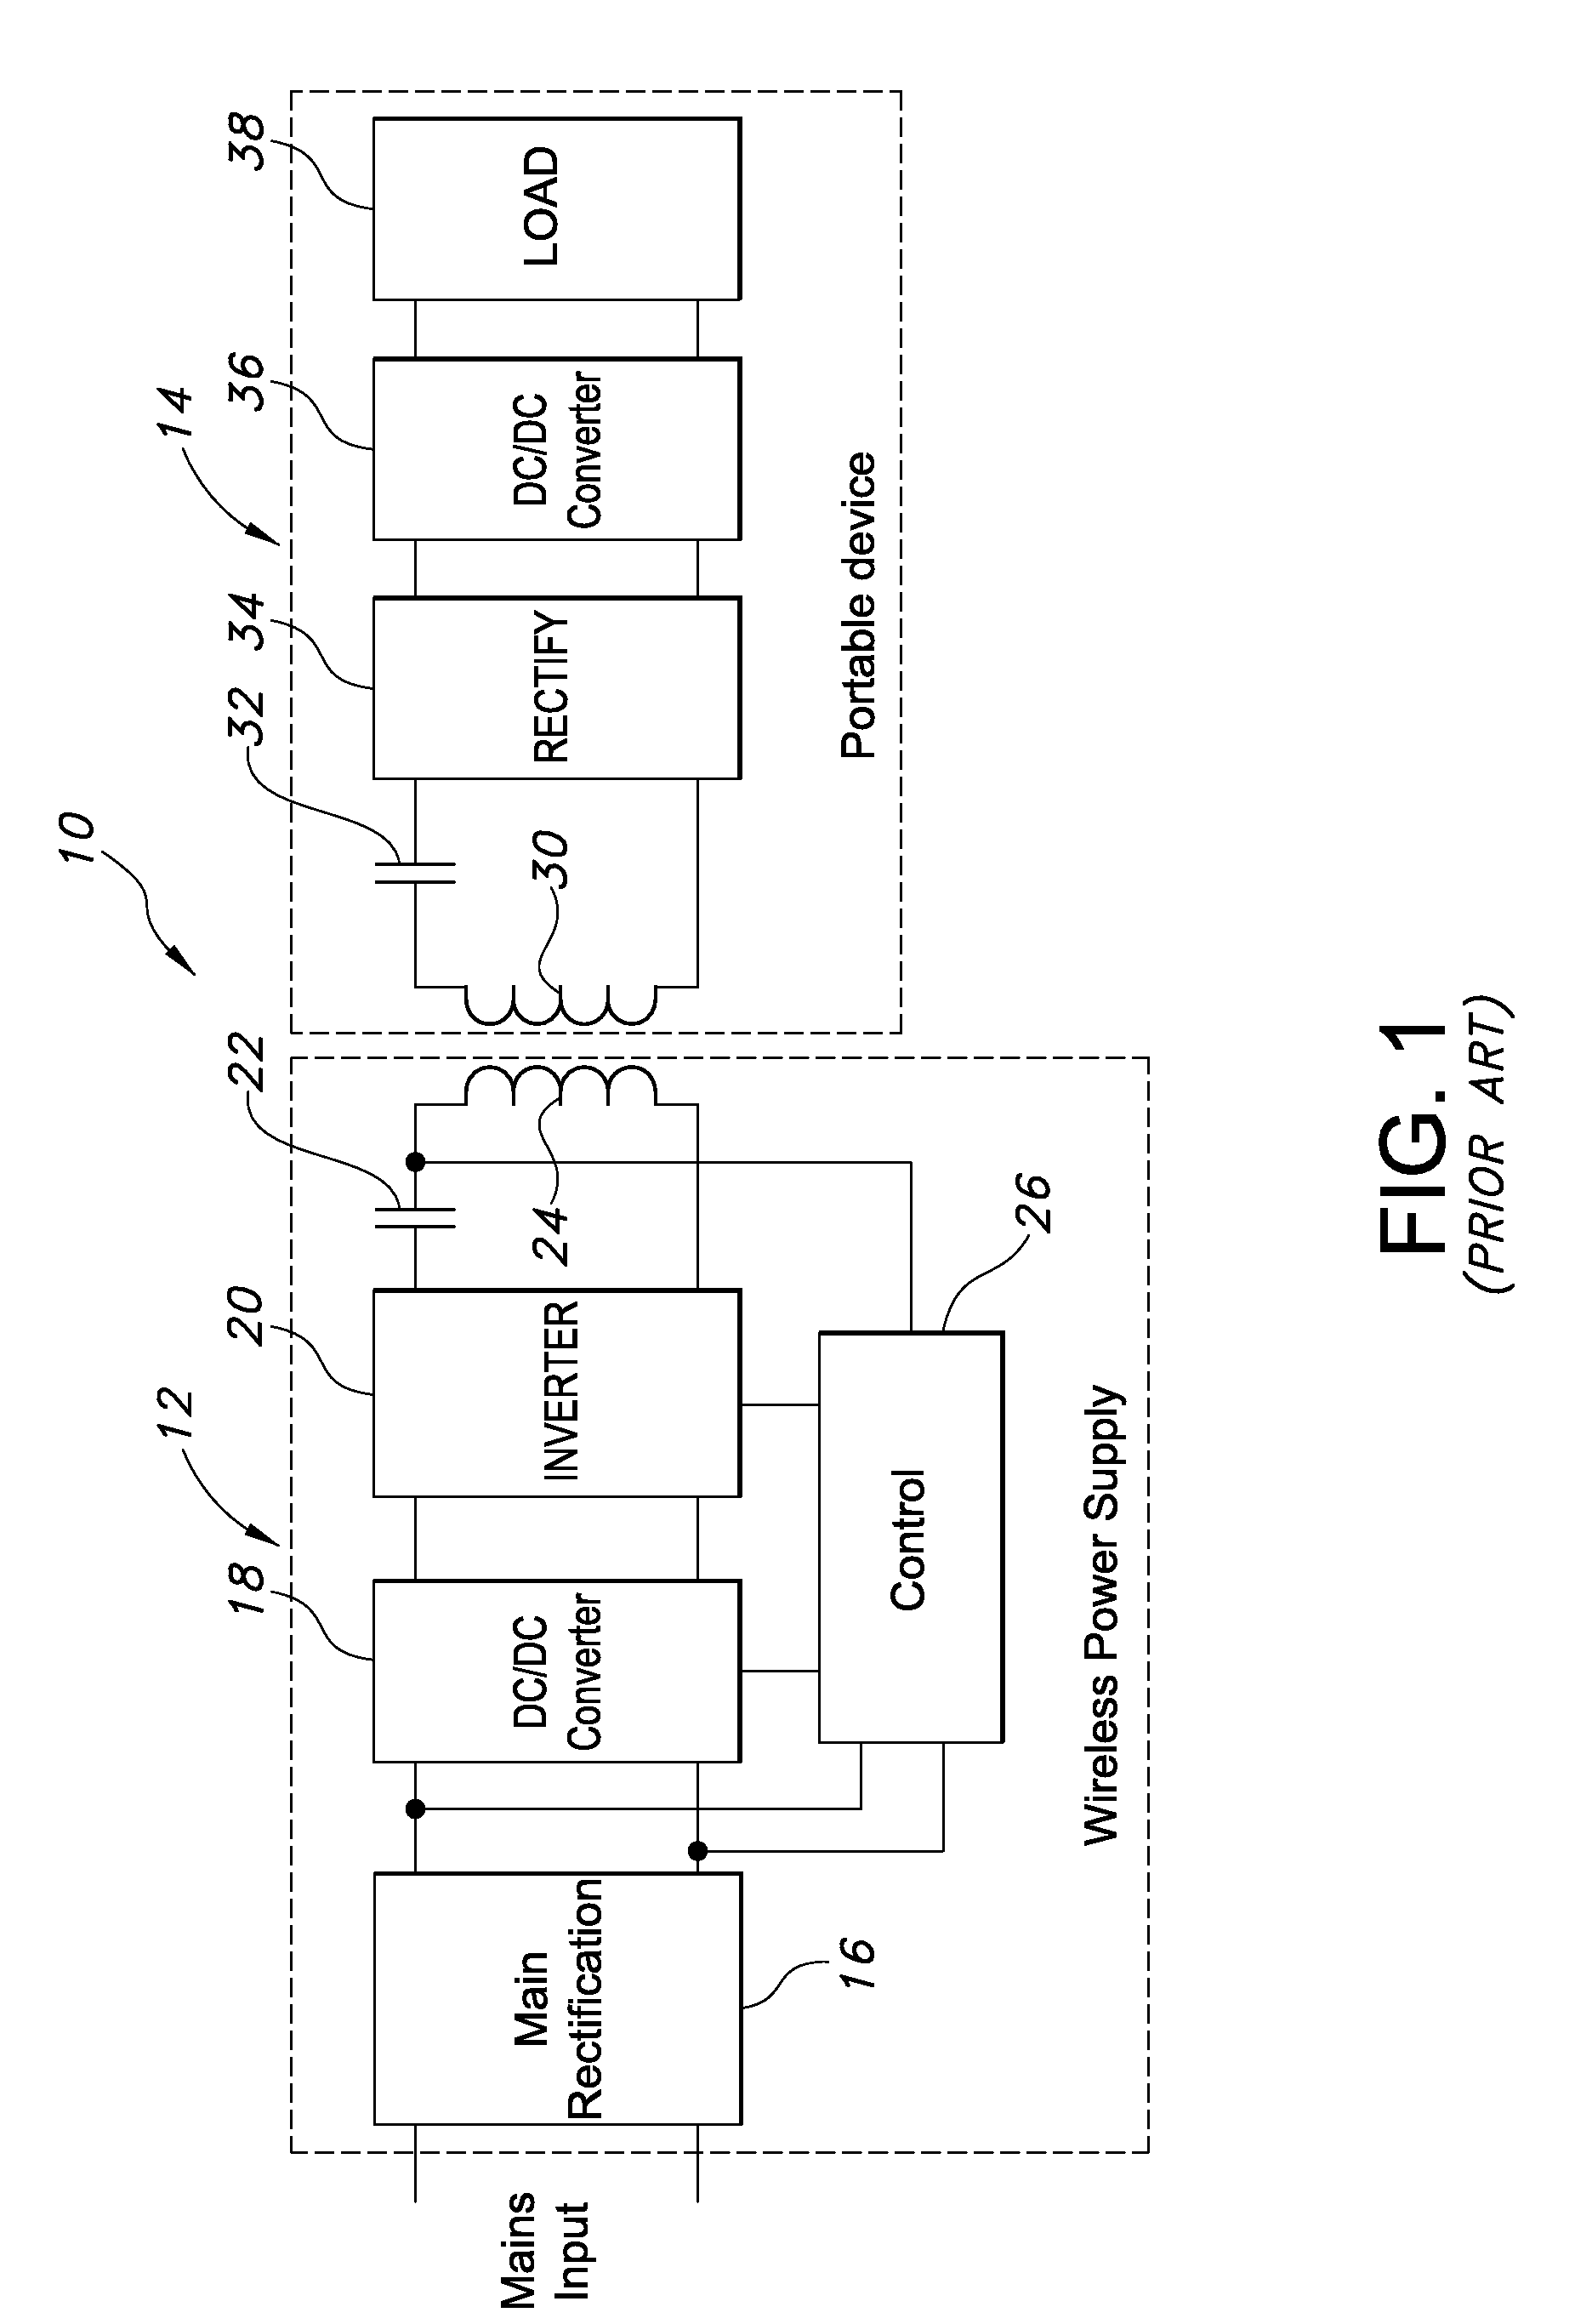 Wireless charging system with device power compliance